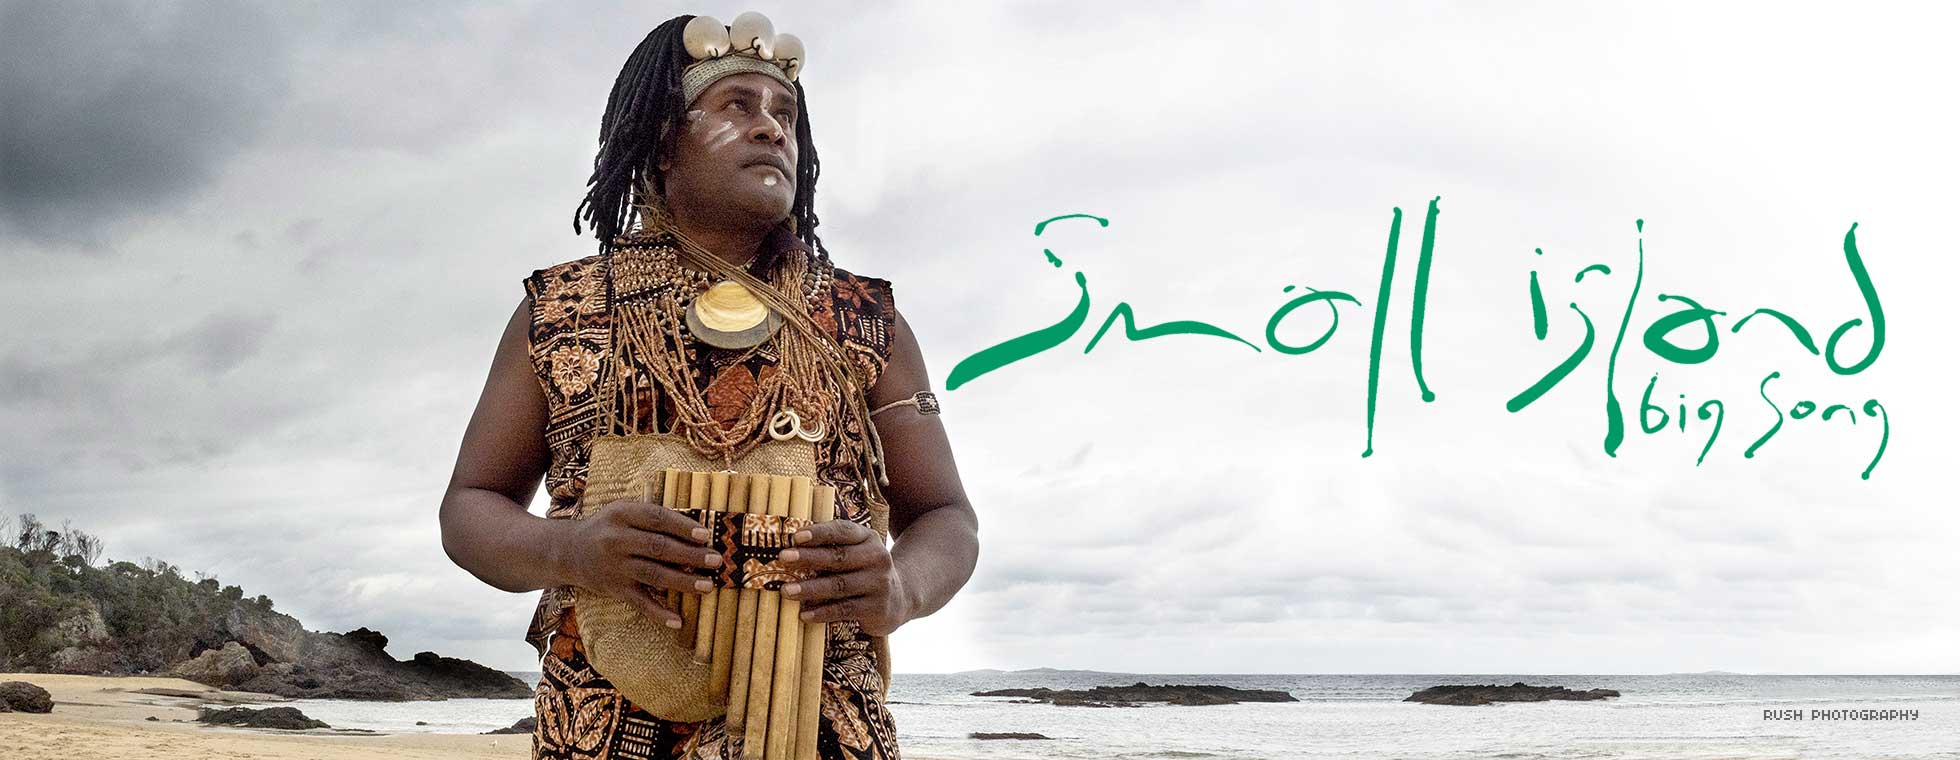 A musician wearing indigenous clothing holds a wind instrument and looks out at the ocean while standing on a tropical beach. 